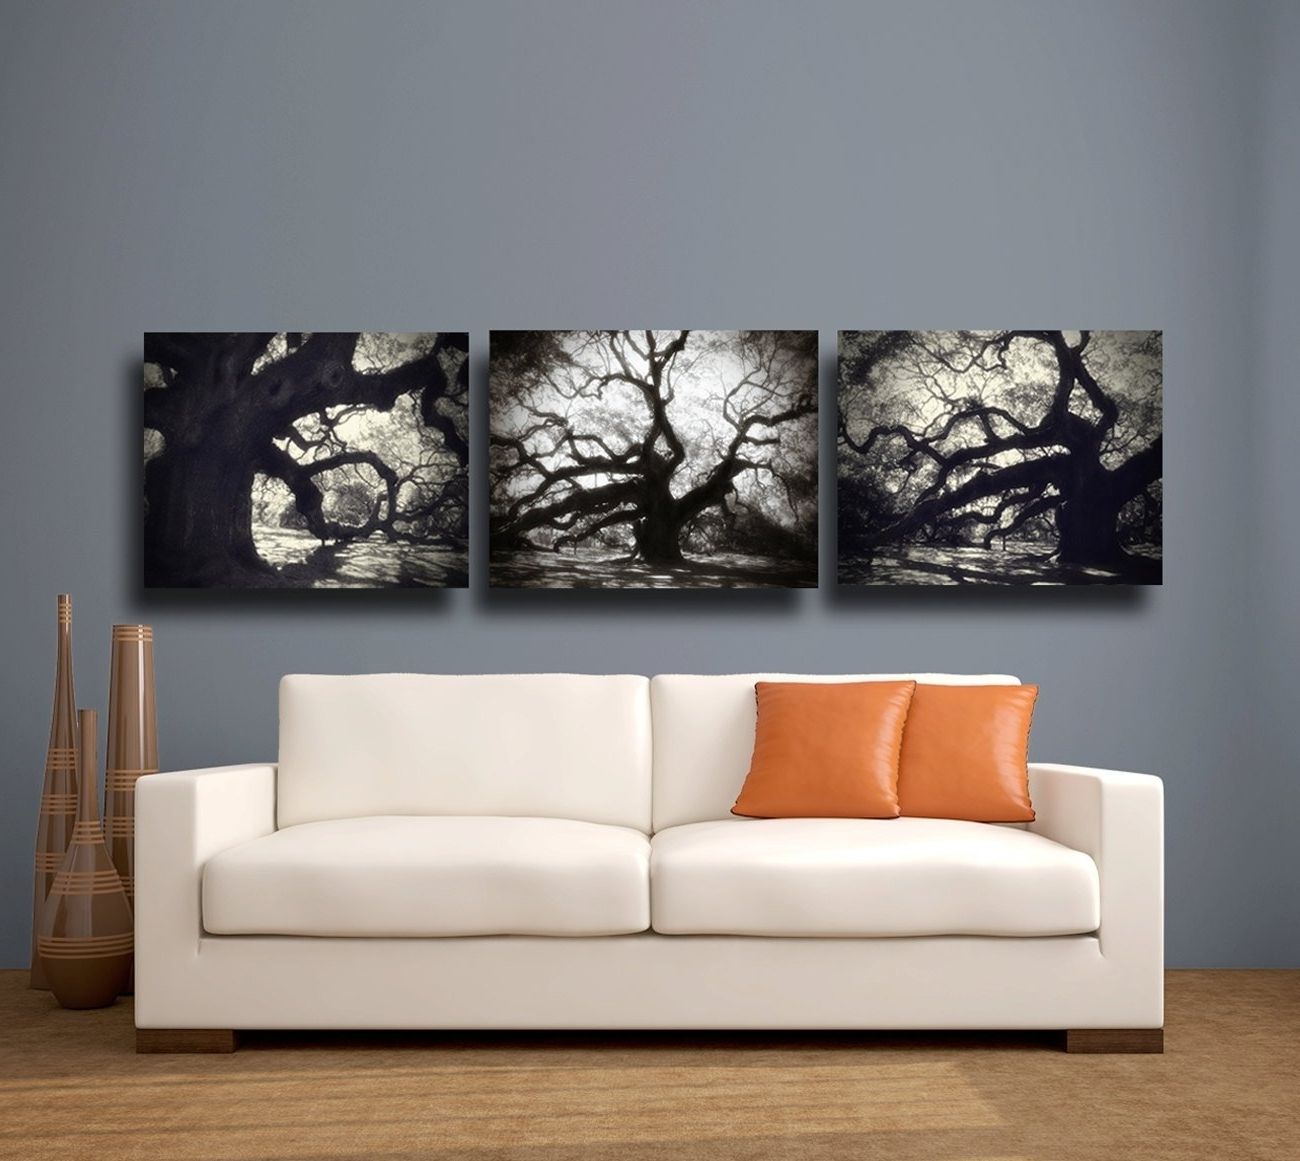 Best And Newest Popular Wall Art With Regard To Popular Wall Art Elegant Large Wall Art On Oversized Wall Art (View 4 of 20)